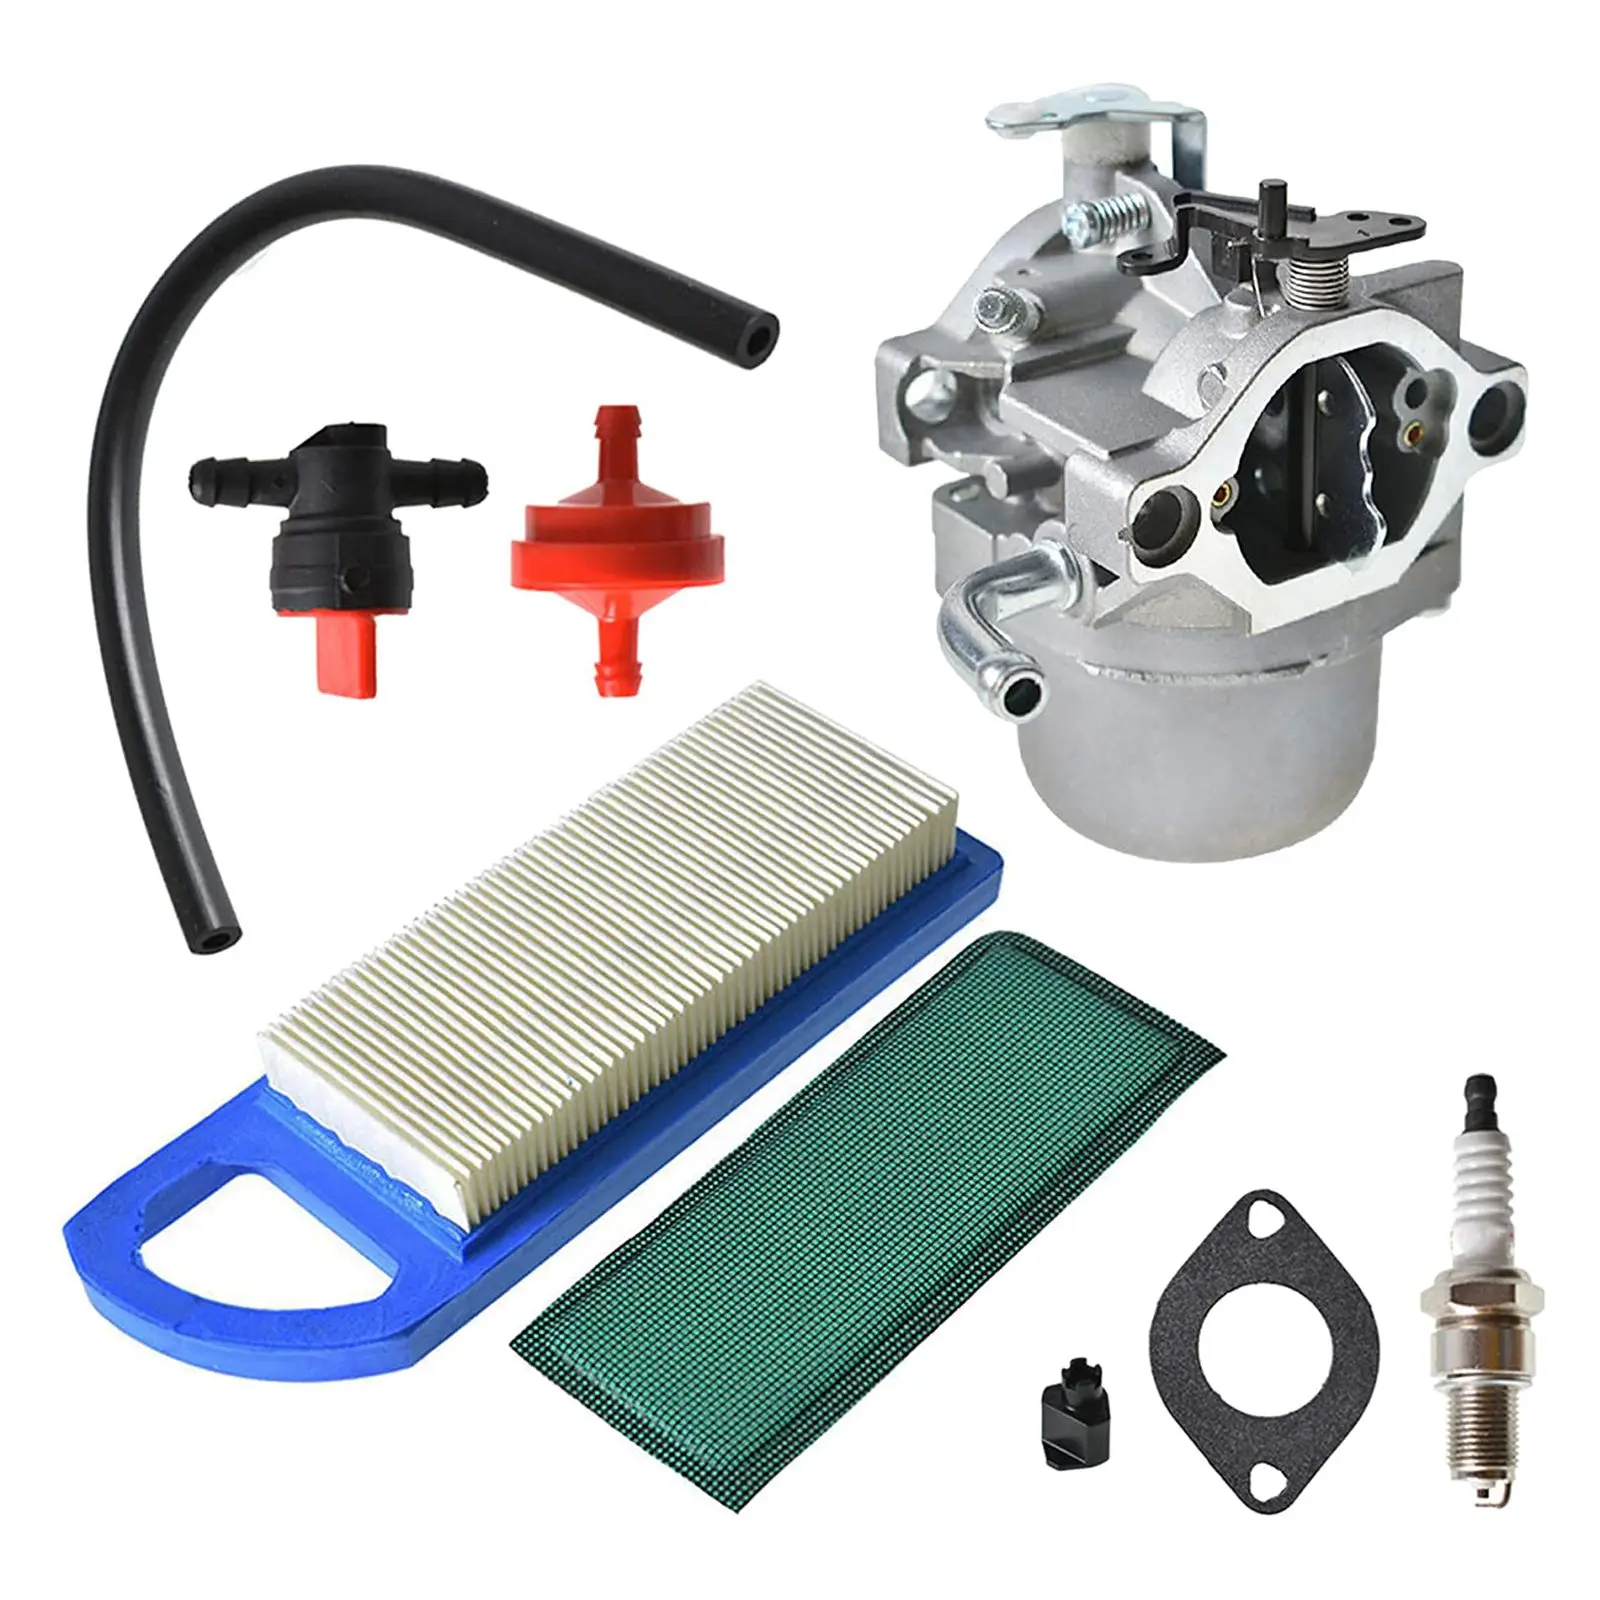 

215802 215807 796077 Carburetor Replacement for Briggs & Stratton 590399 215872 217802 217807, with Air Fuel Filter